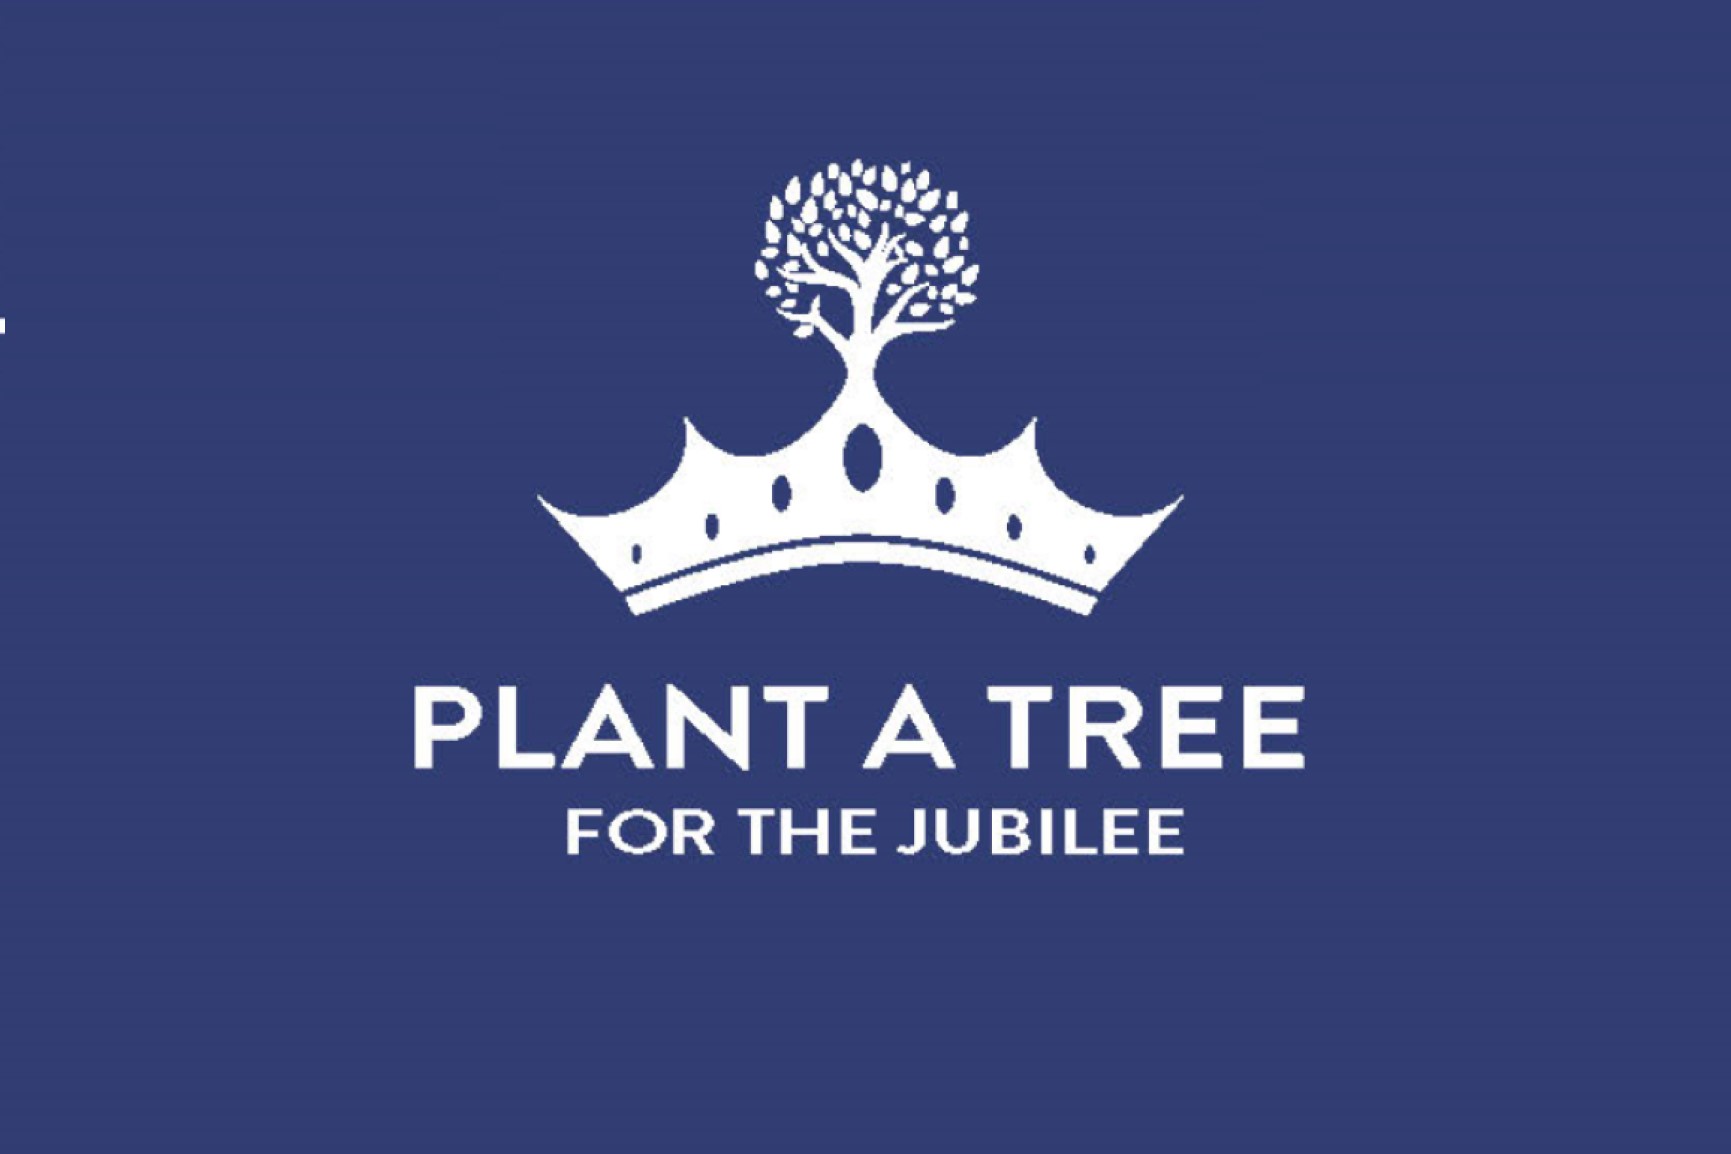 We’re delighted to be taking part in the Queen’s Green Canopy Initiative